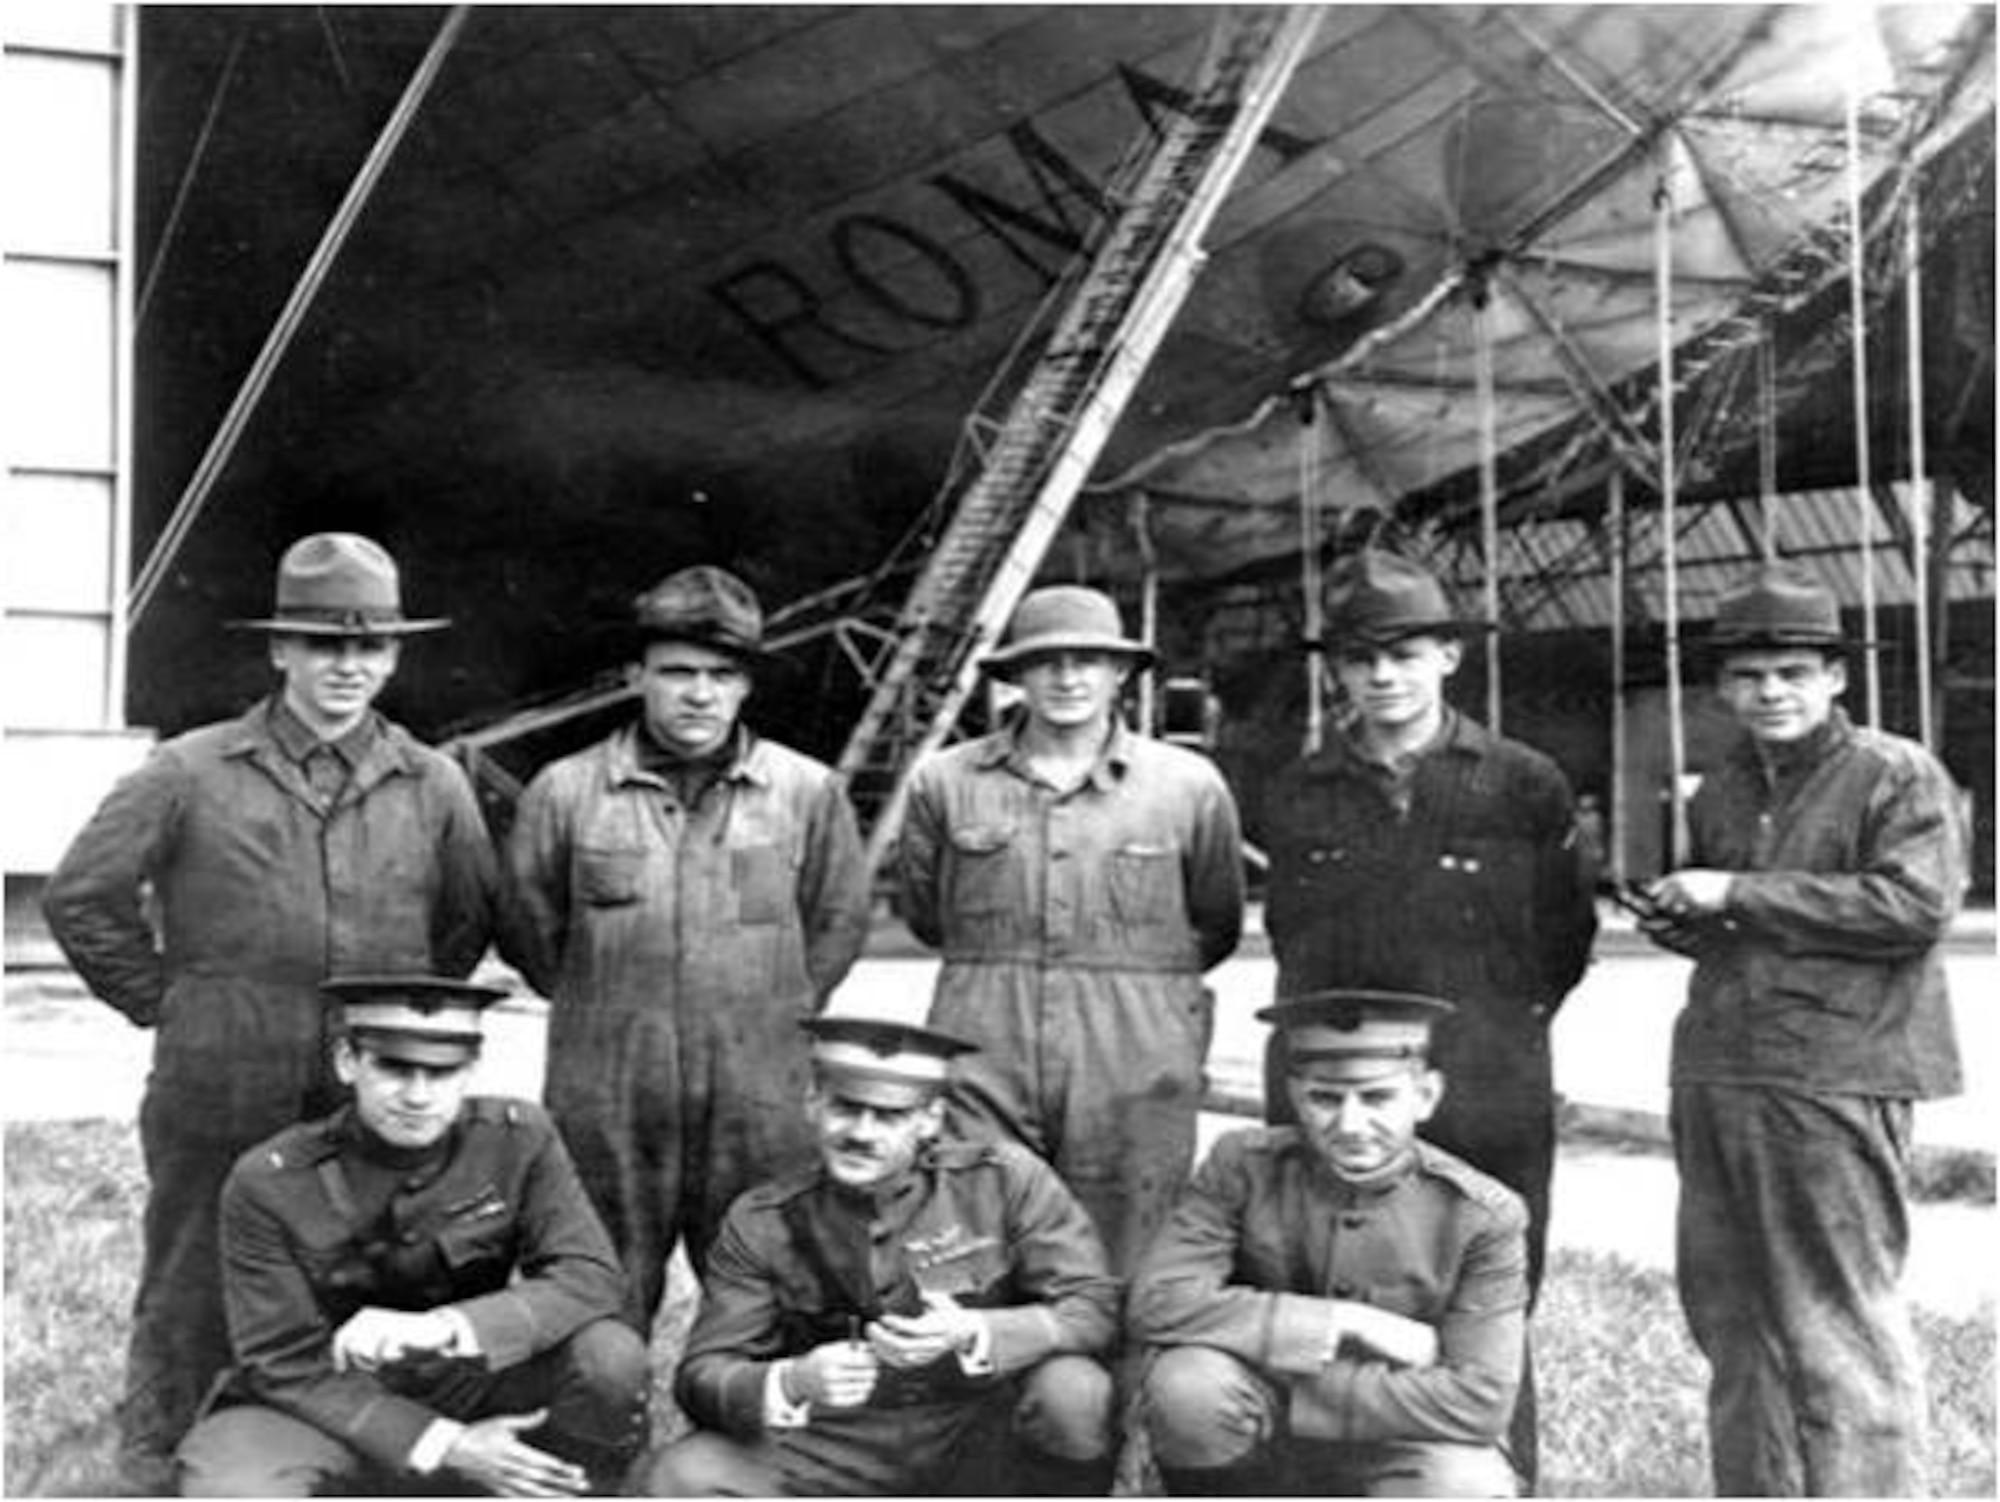 Pictured is the crew of the Army airship Roma. Roma crashed during a test flight on 21 Feb., 1922 claiming 34 lives. (Courtesy photo)